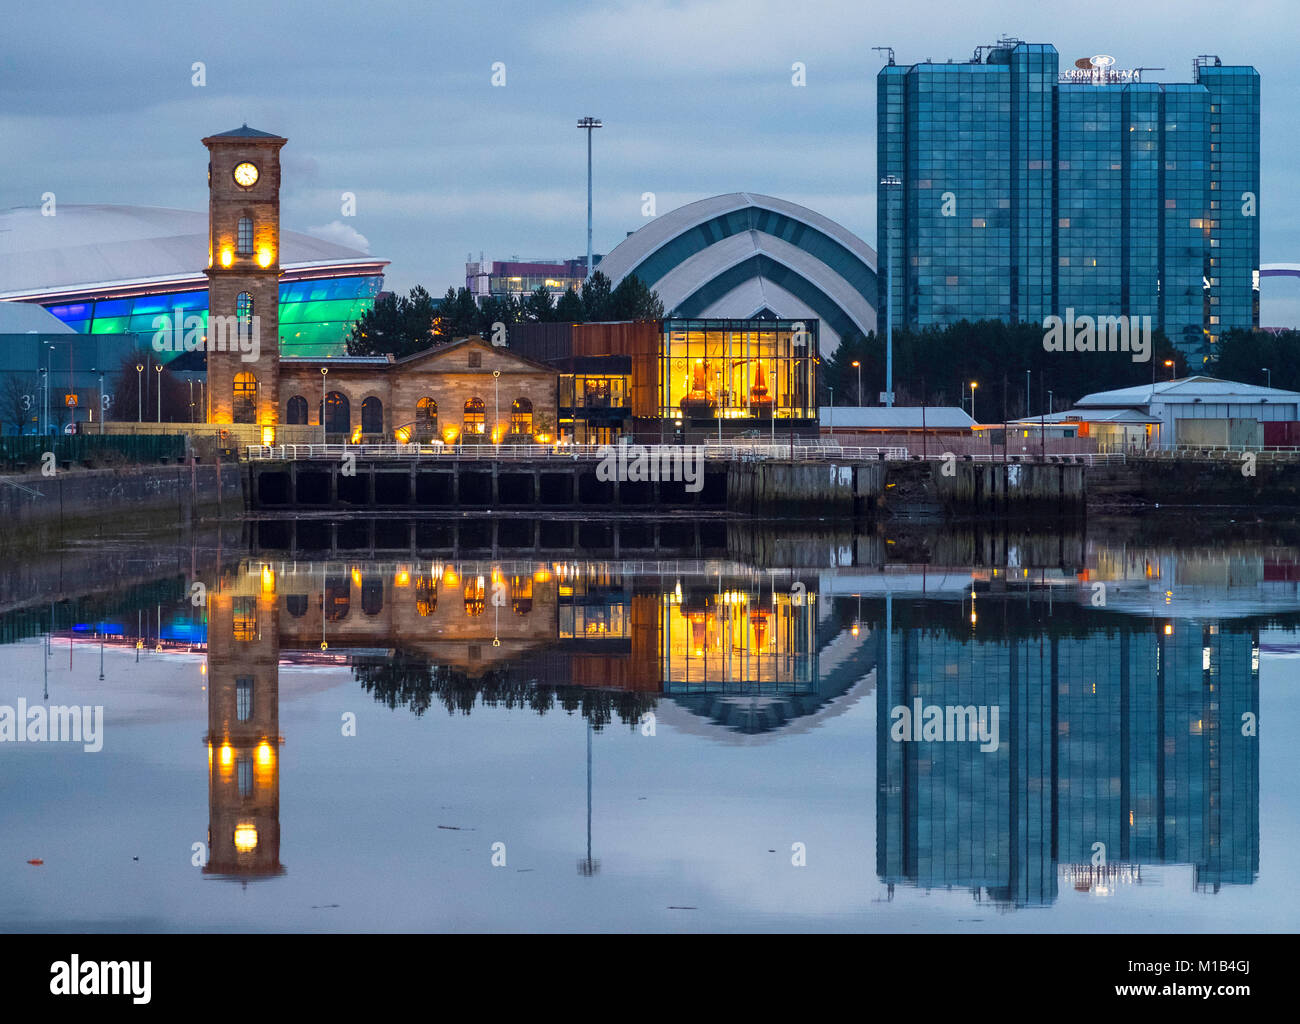 Exterior view of new Clydeside Distillery on riverbank of River Clyde in Glasgow, Scotland, United Kingdom Stock Photo